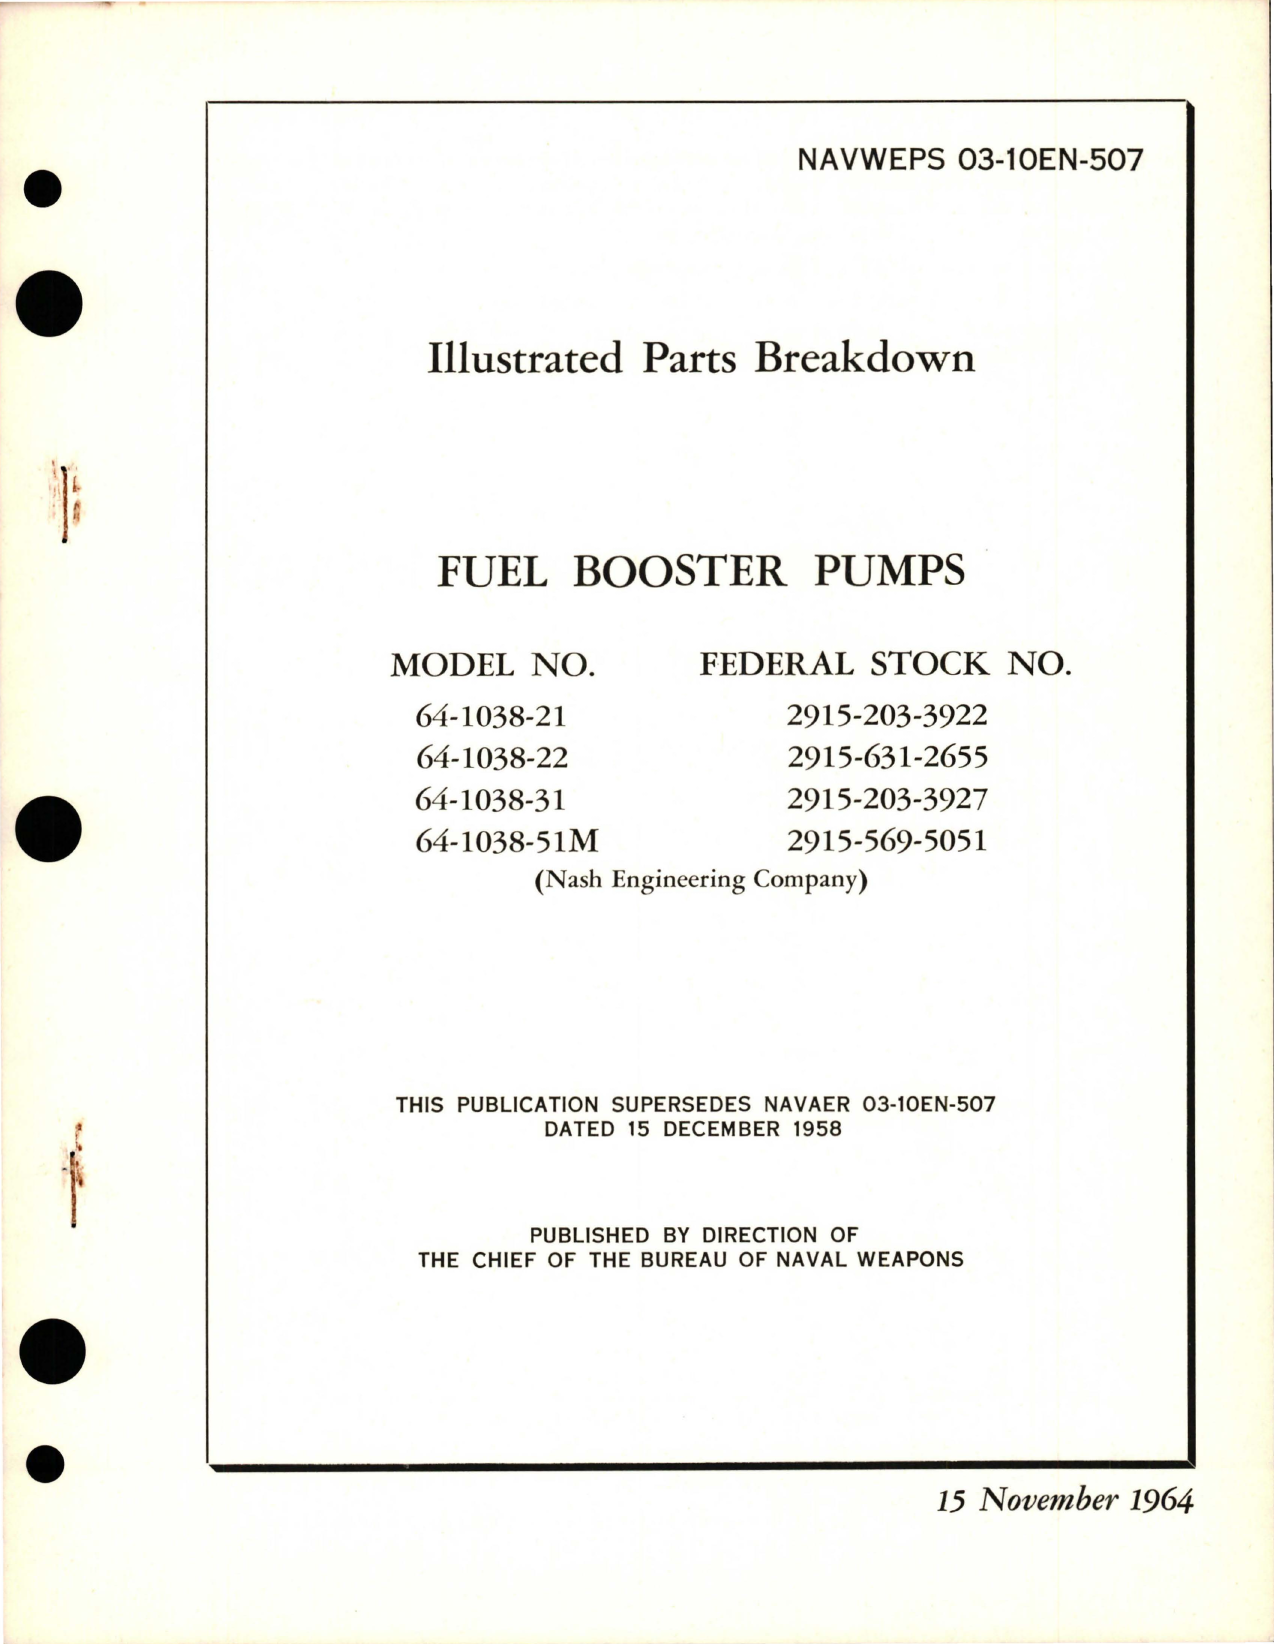 Sample page 1 from AirCorps Library document: Illustrated Parts Breakdown for Fuel Booster Pumps